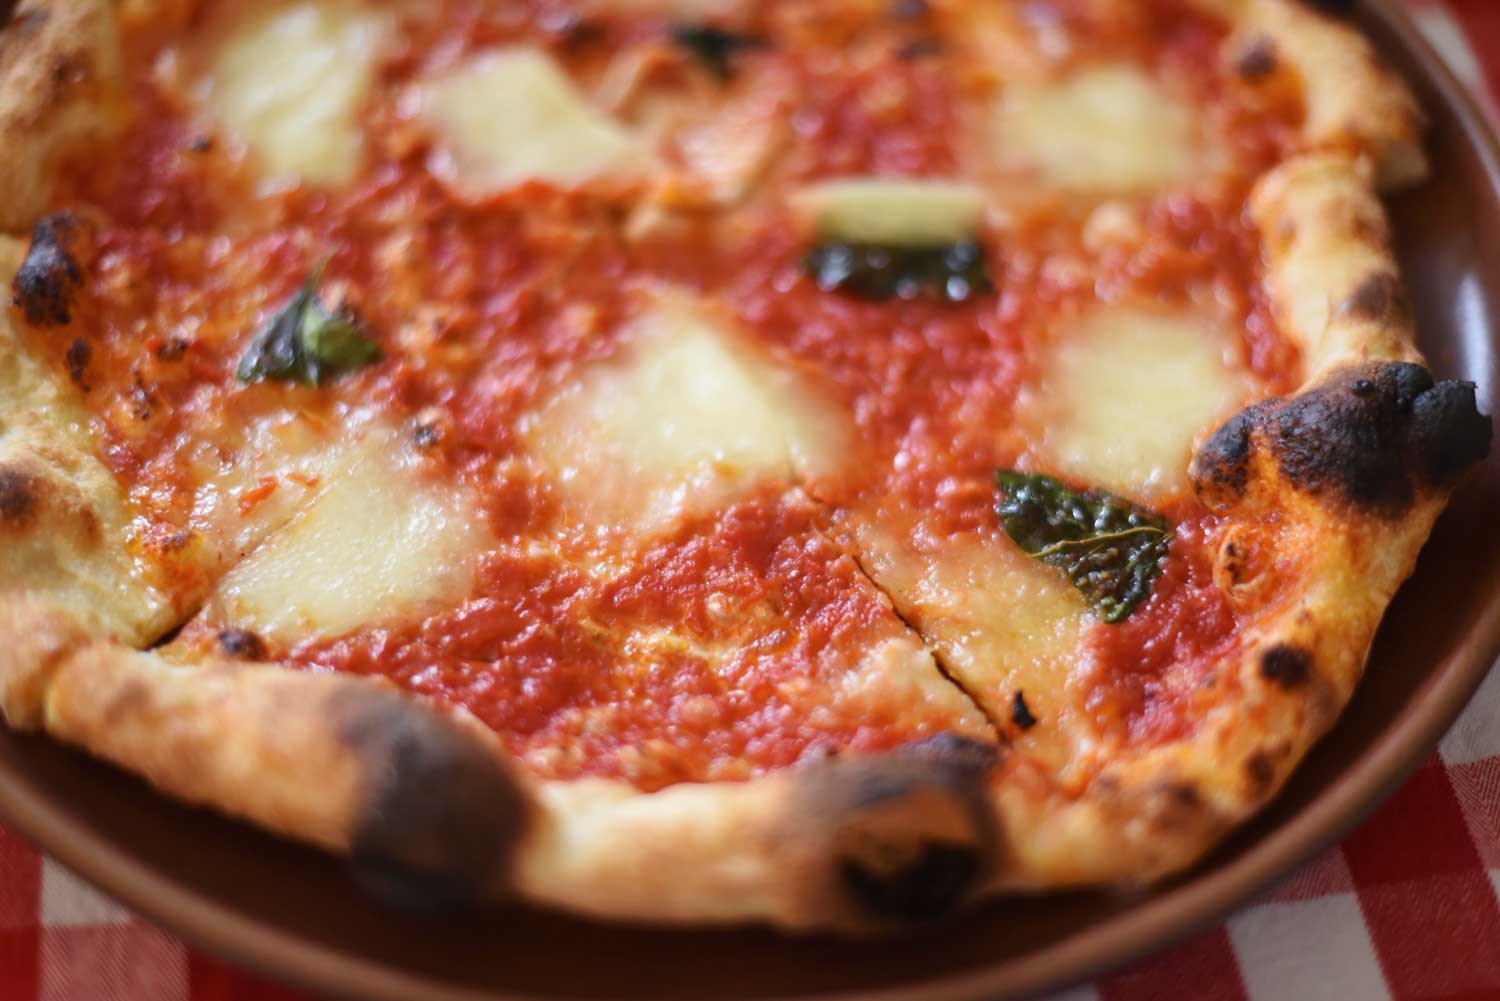 Delfina's Neapolitan pizza sizzles when it comes out of the oven